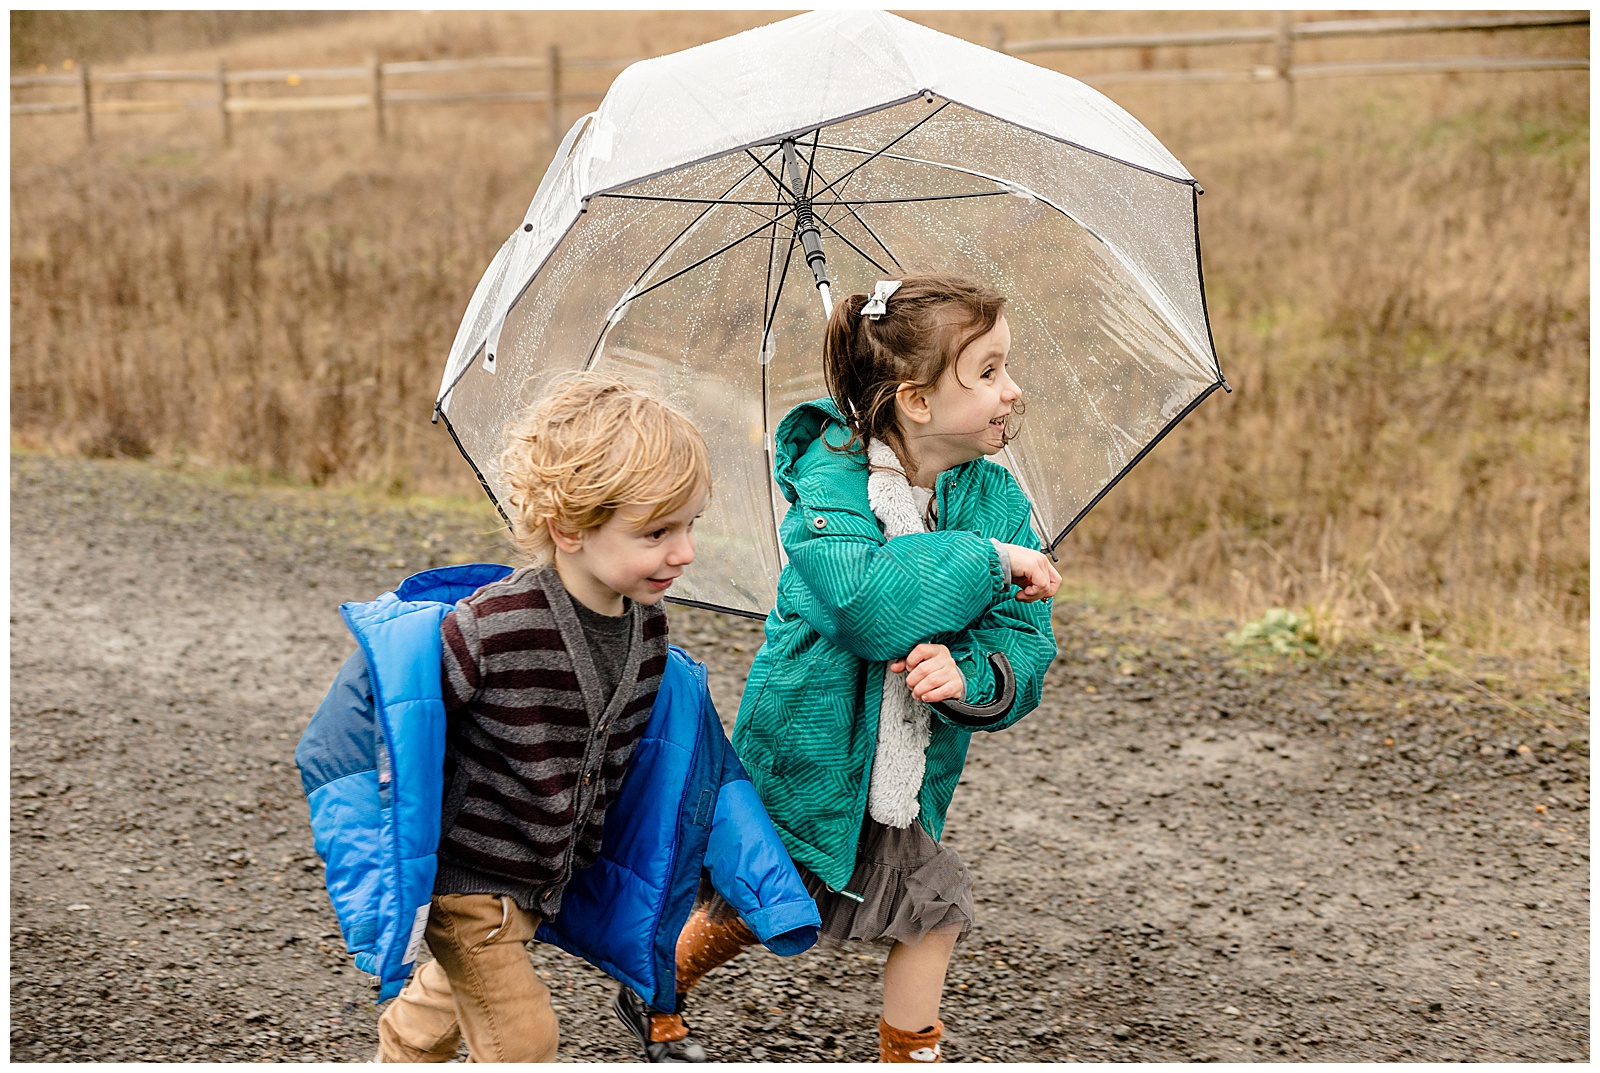 3 year old boy and 5 year old girl running with rain coats and clear umbrella